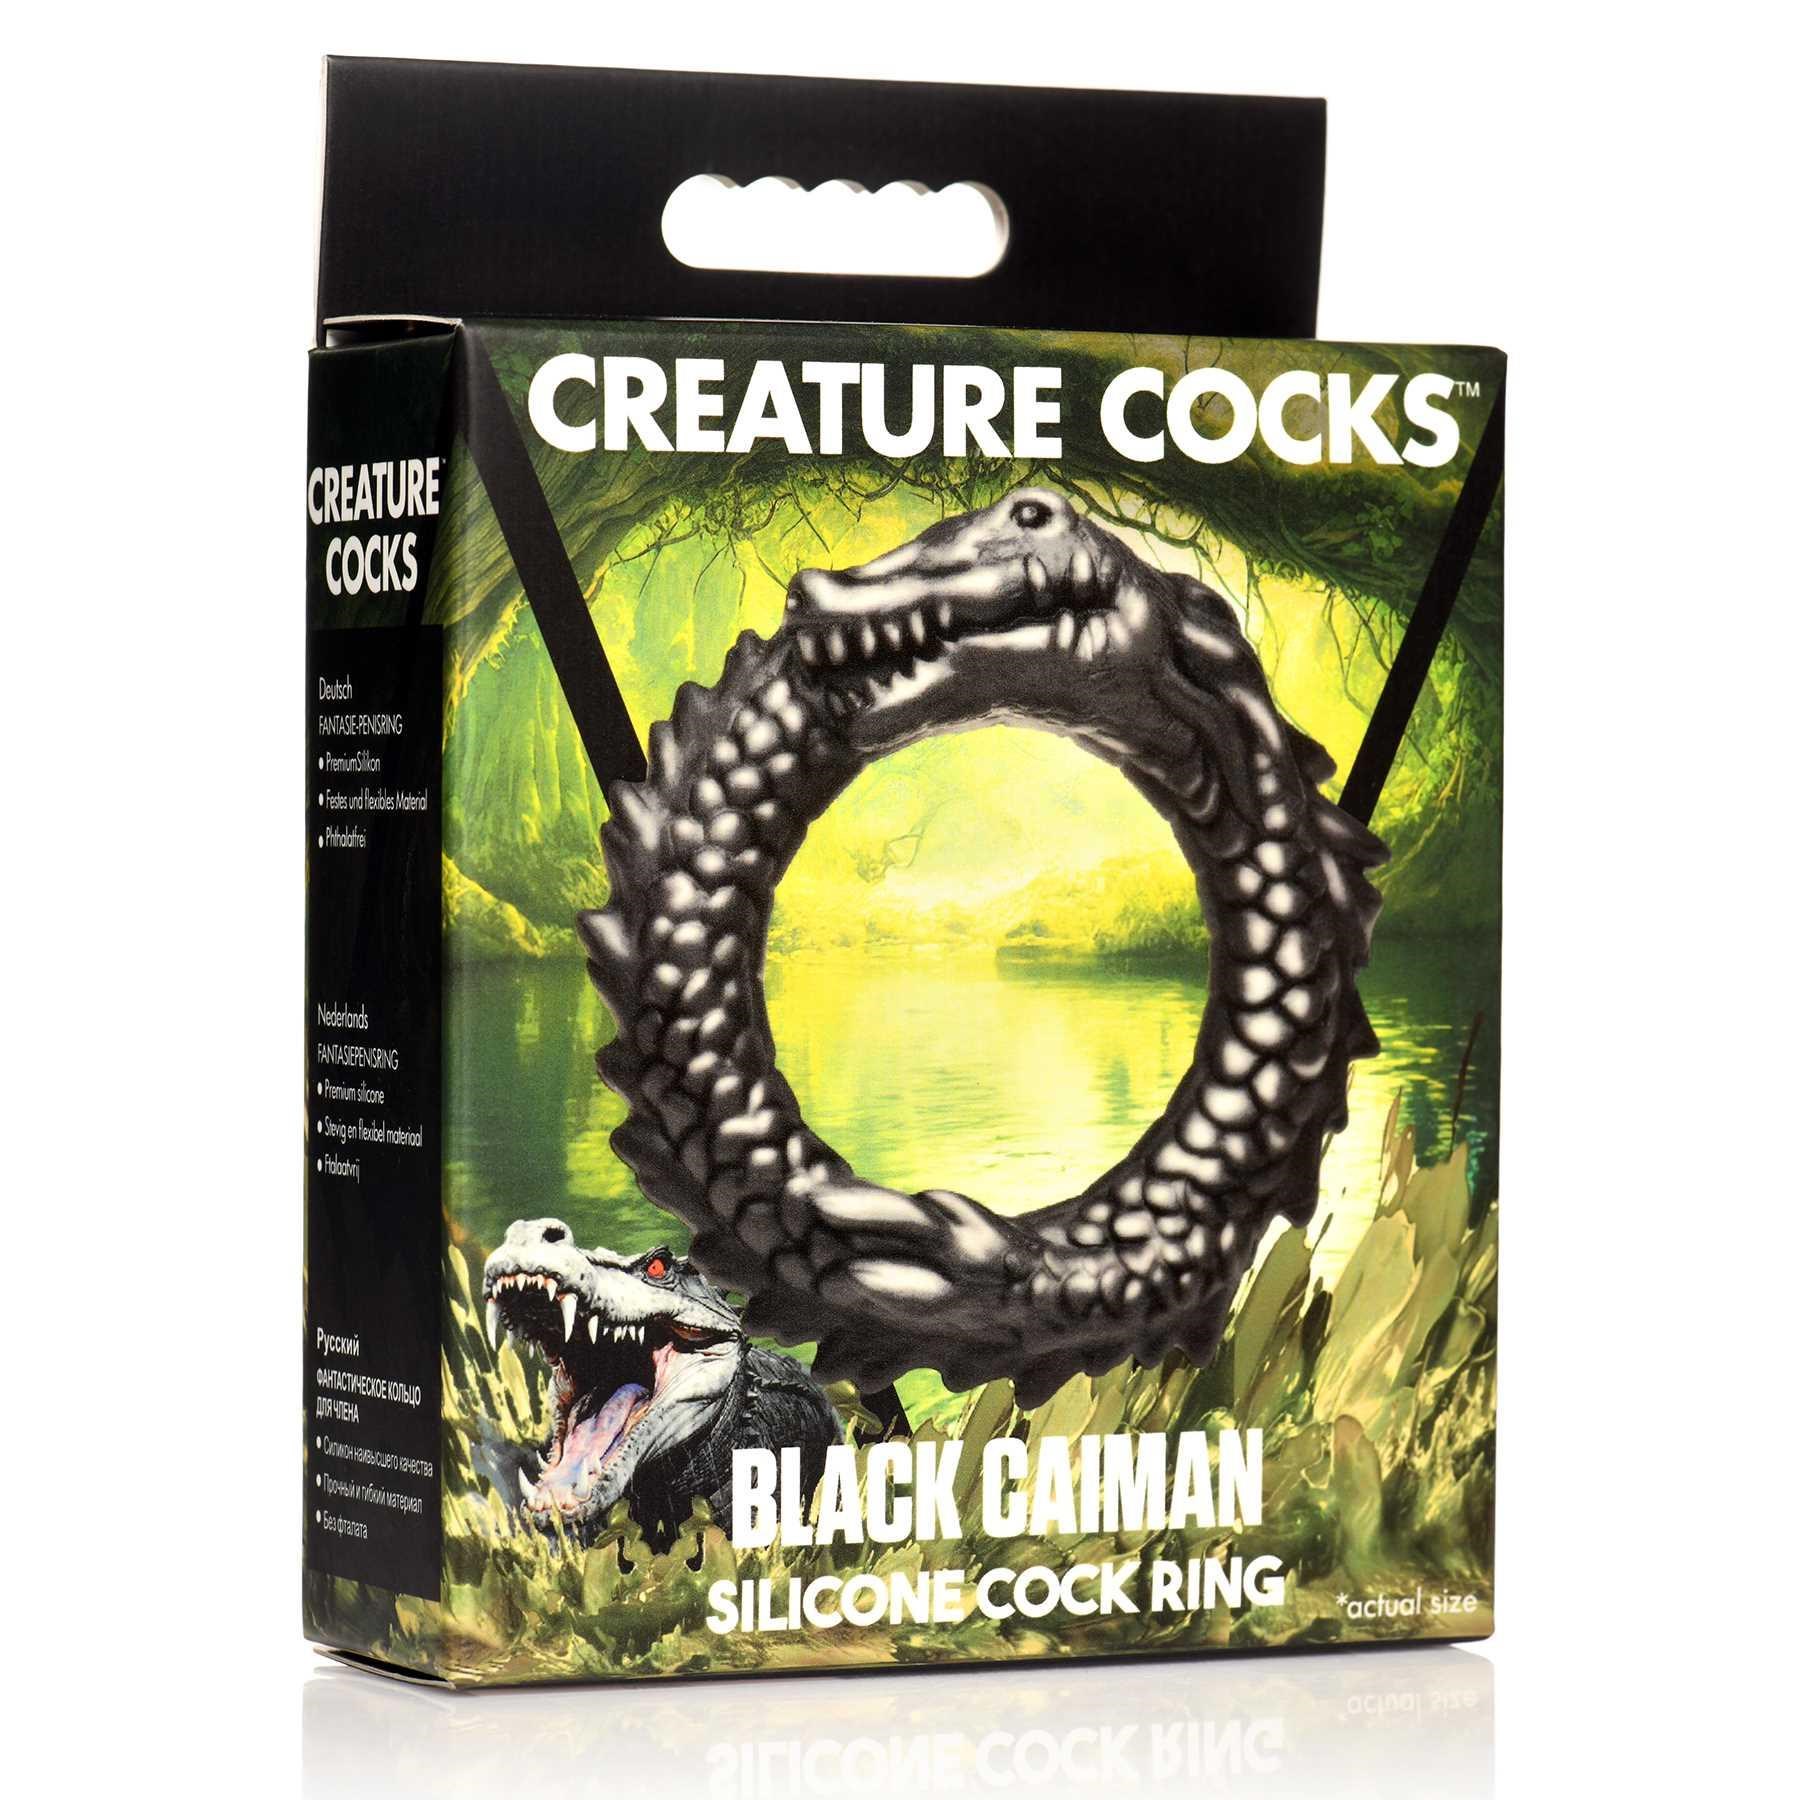 Creature Cocks Black Caiman Silicone Cock Ring packaging